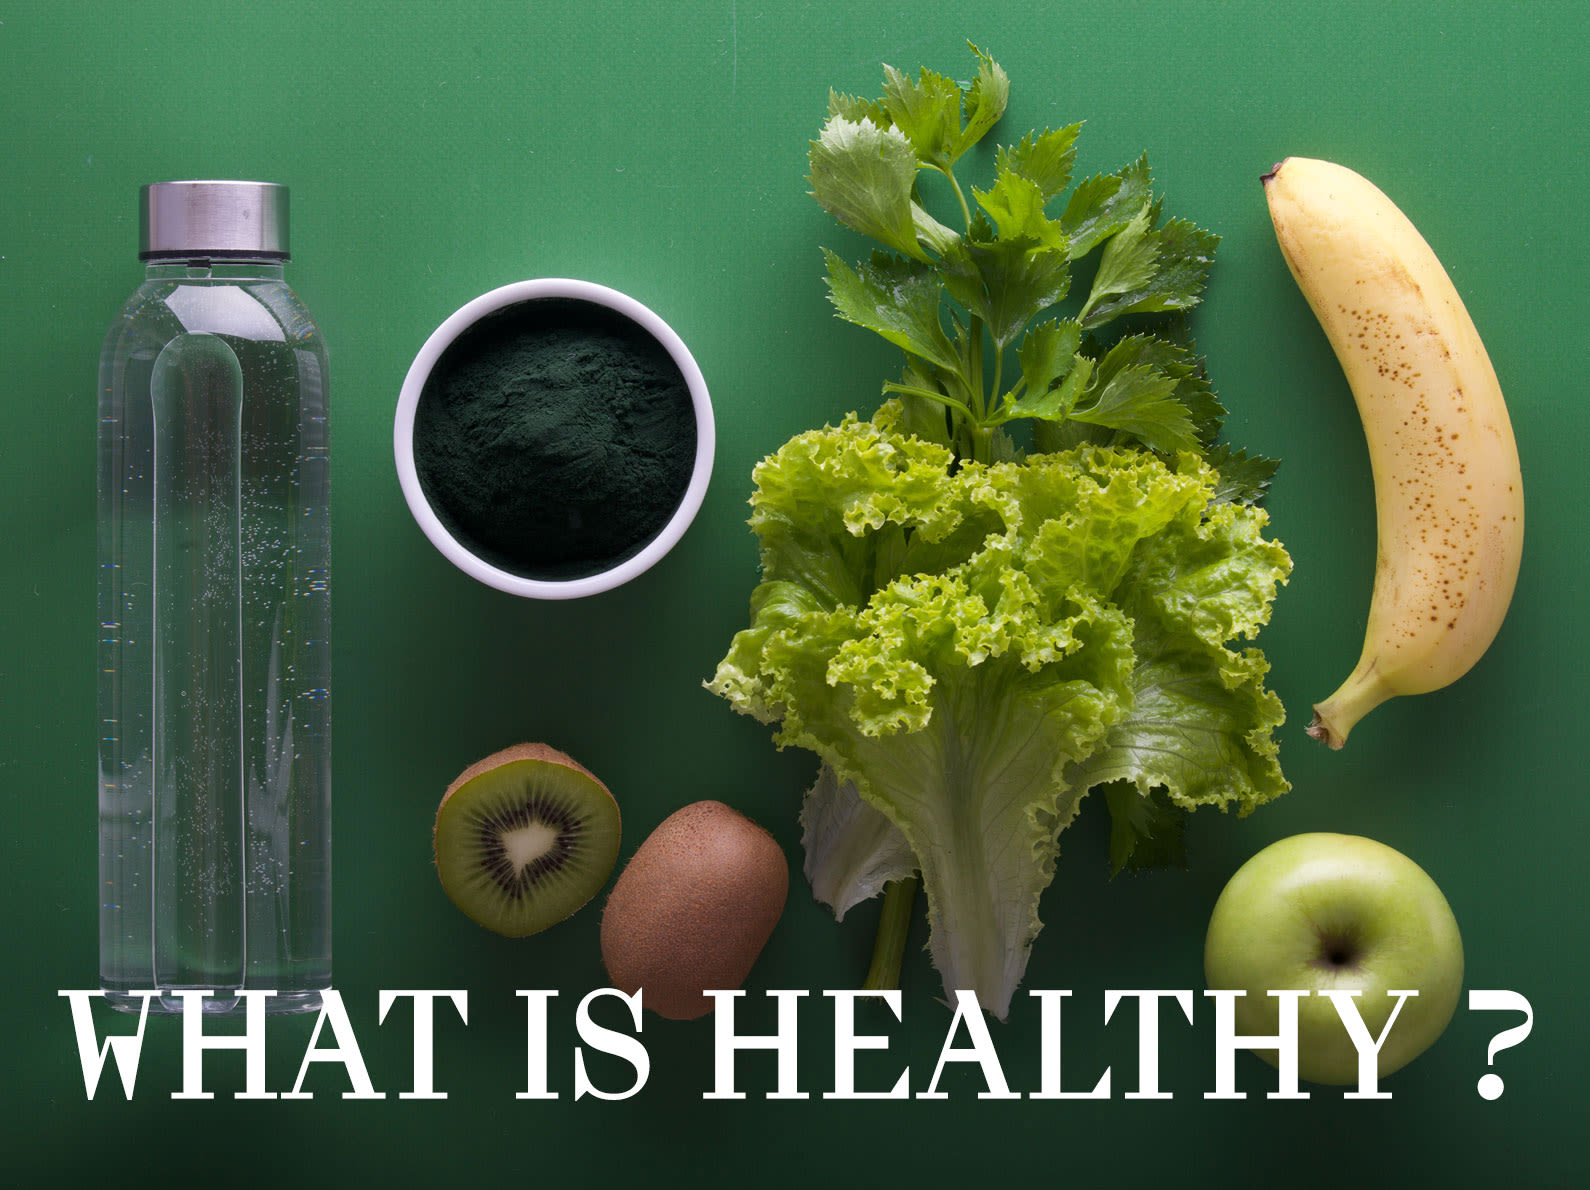 Still life with glass water bottle, matcha, lettuce, kiwi, banana and green apple and 'What is healthy?' text overlay.